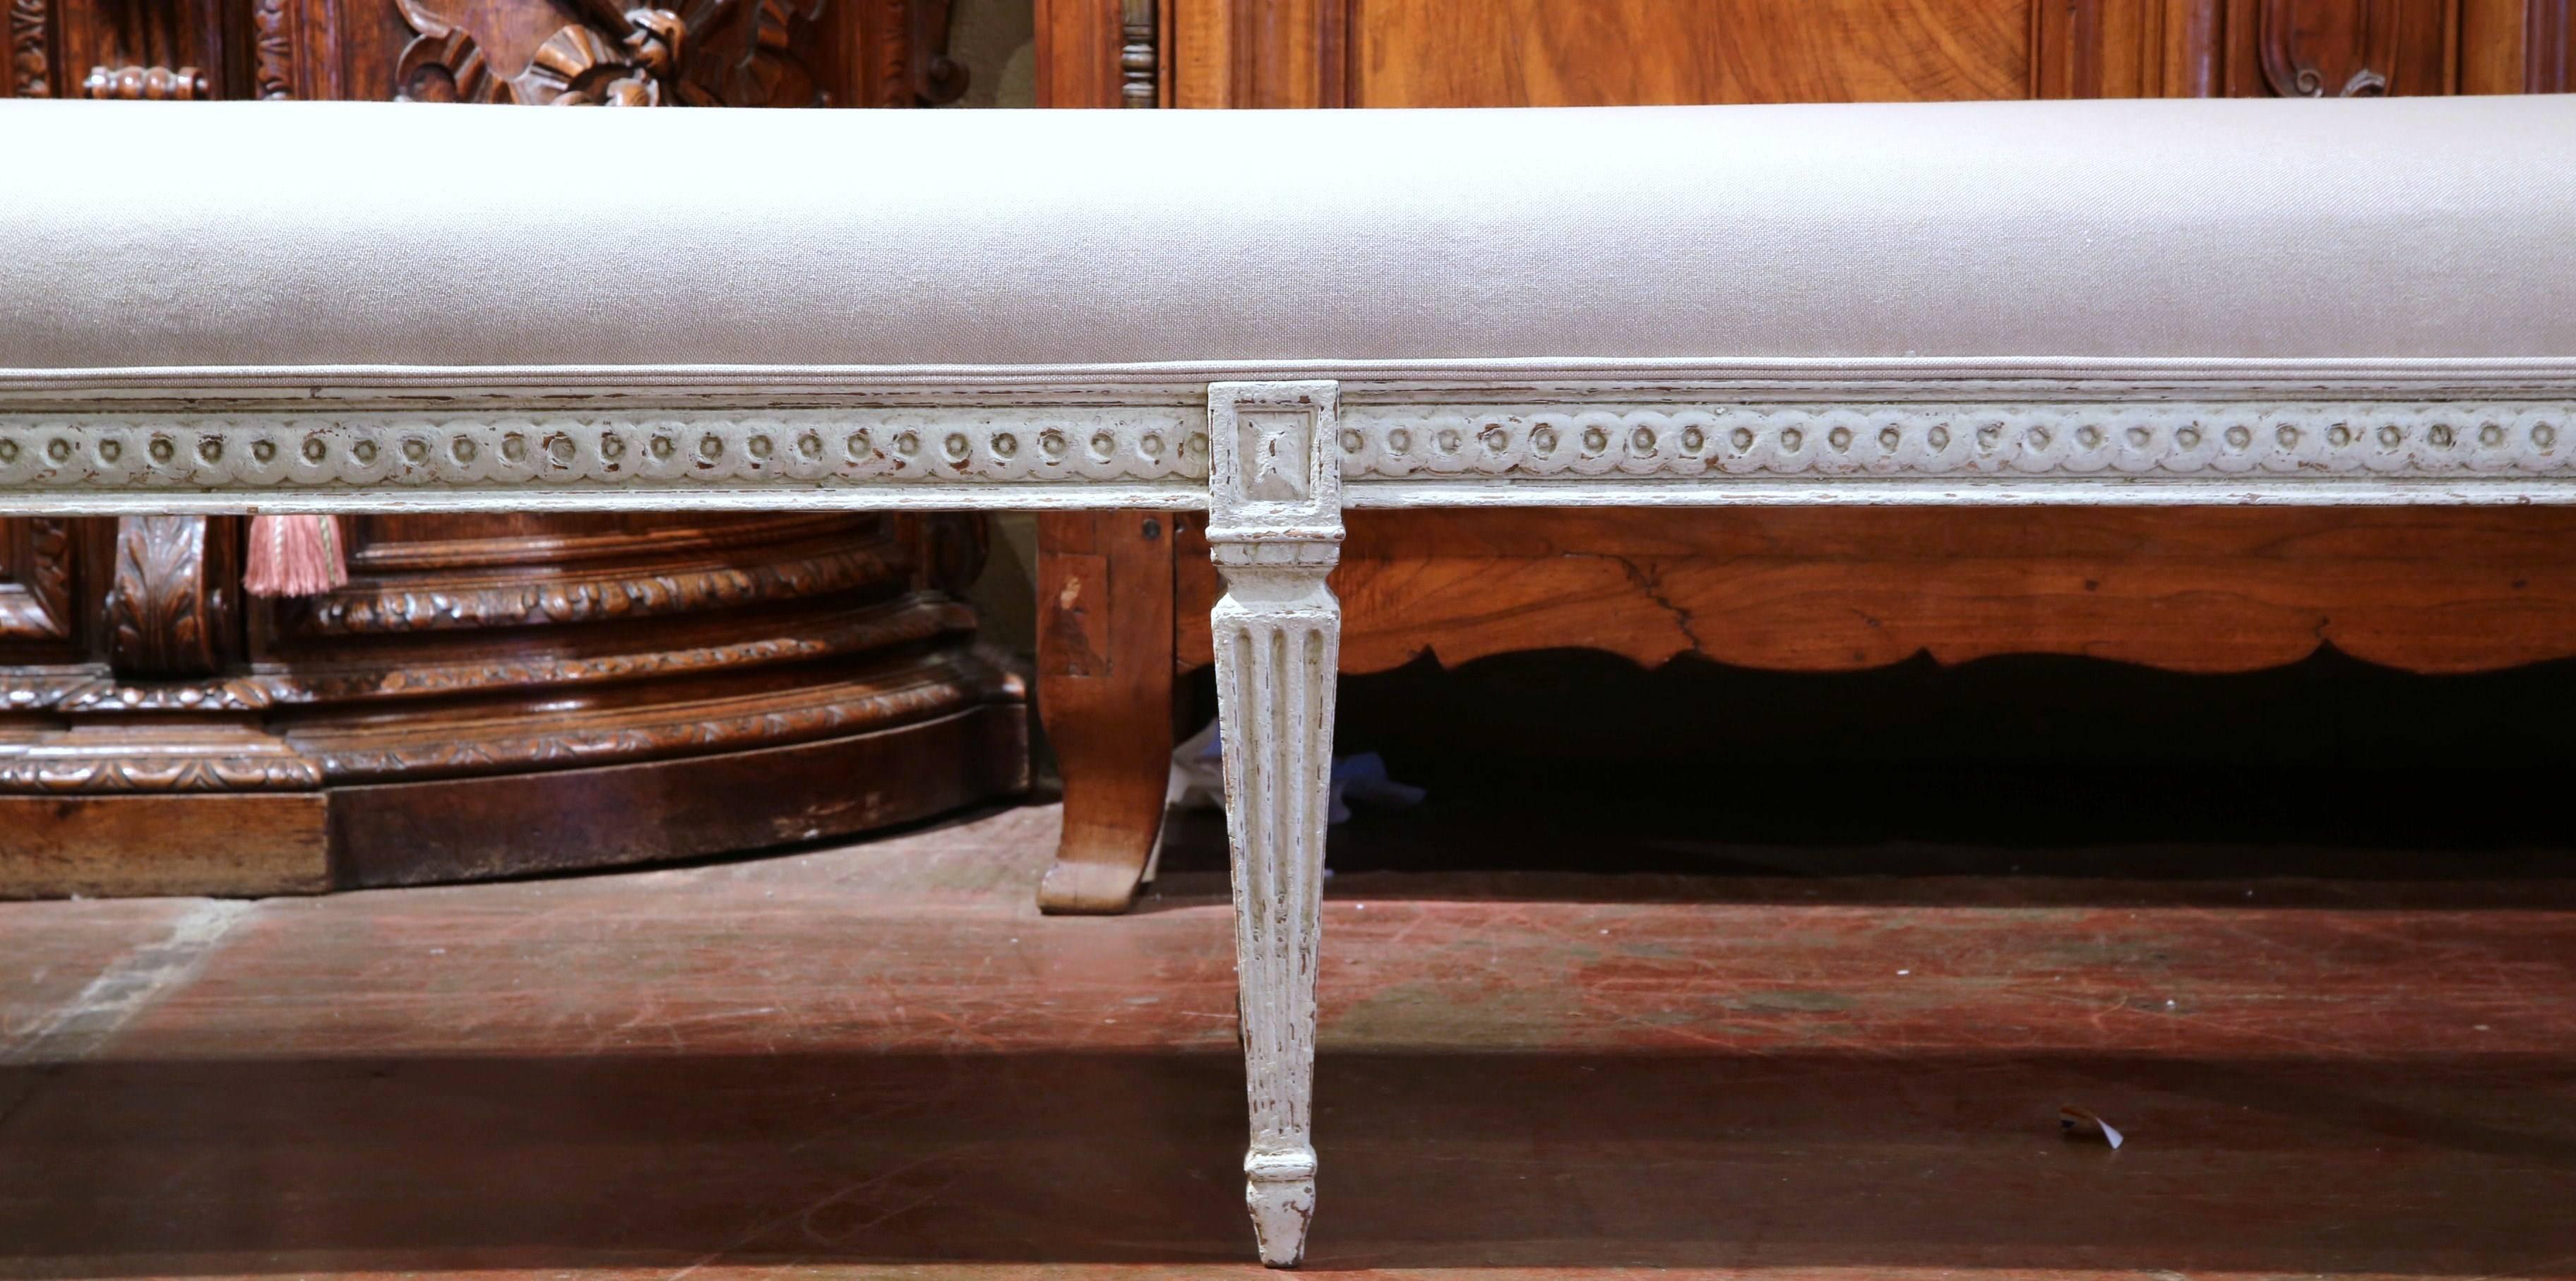 Add extra seating to a hallway, entryway or living room with this nicely carved, Louis XVI bench from France. Carved, circa 1880, the antique bench has six tapered legs, symmetrical carvings around the apron, and is reupholstered with a thick grey